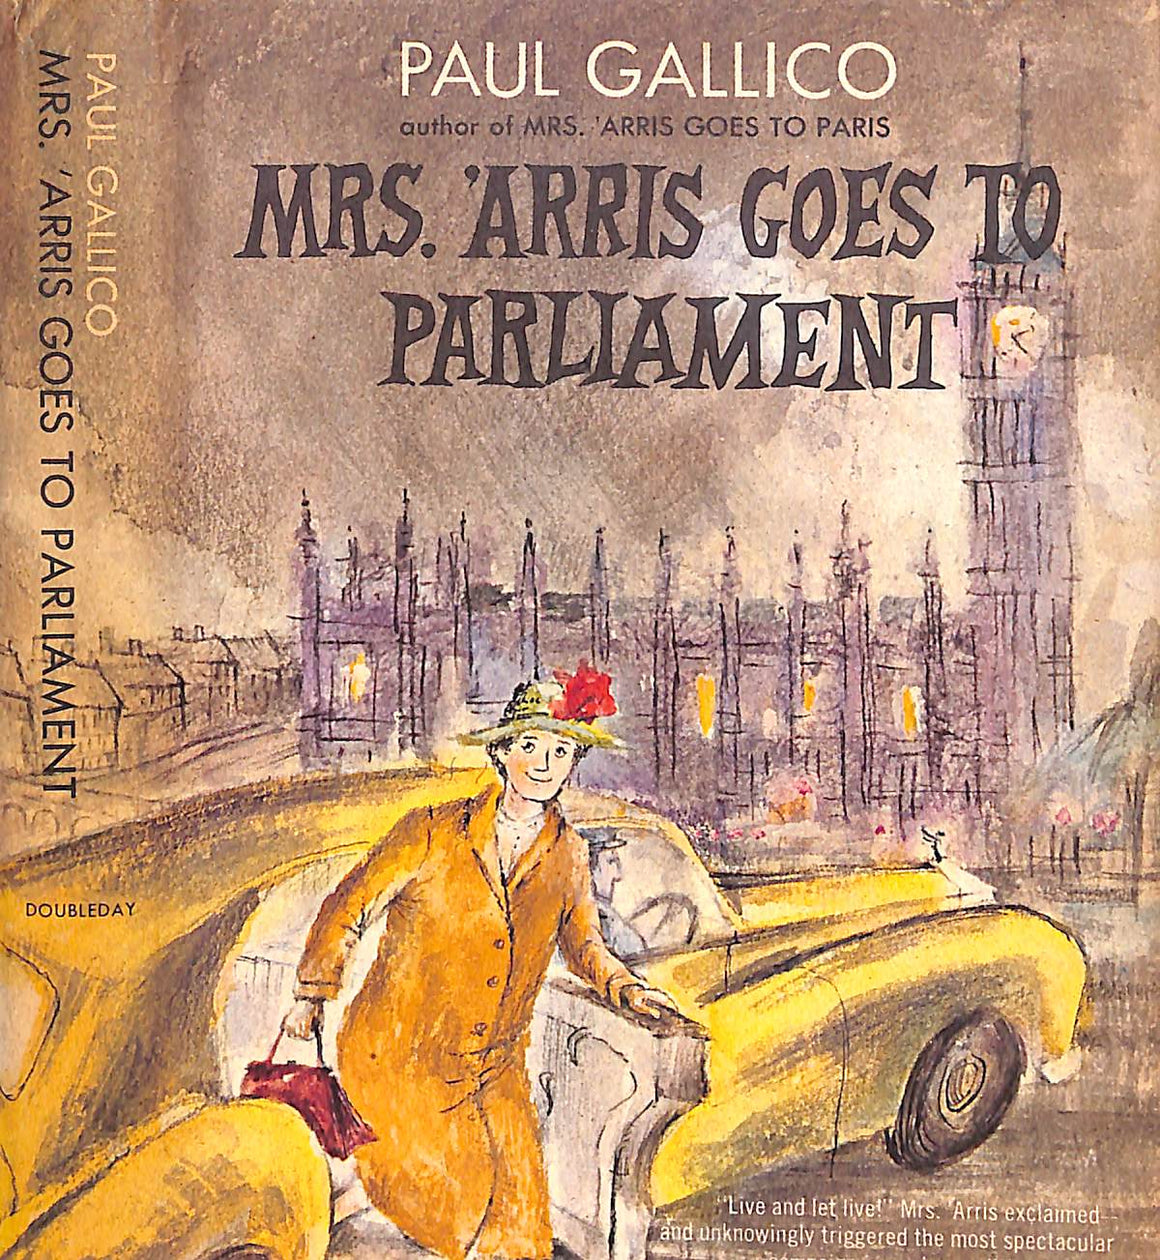 "Mrs. 'Arris Goes To Parliament" 1965 GALLICO, Paul